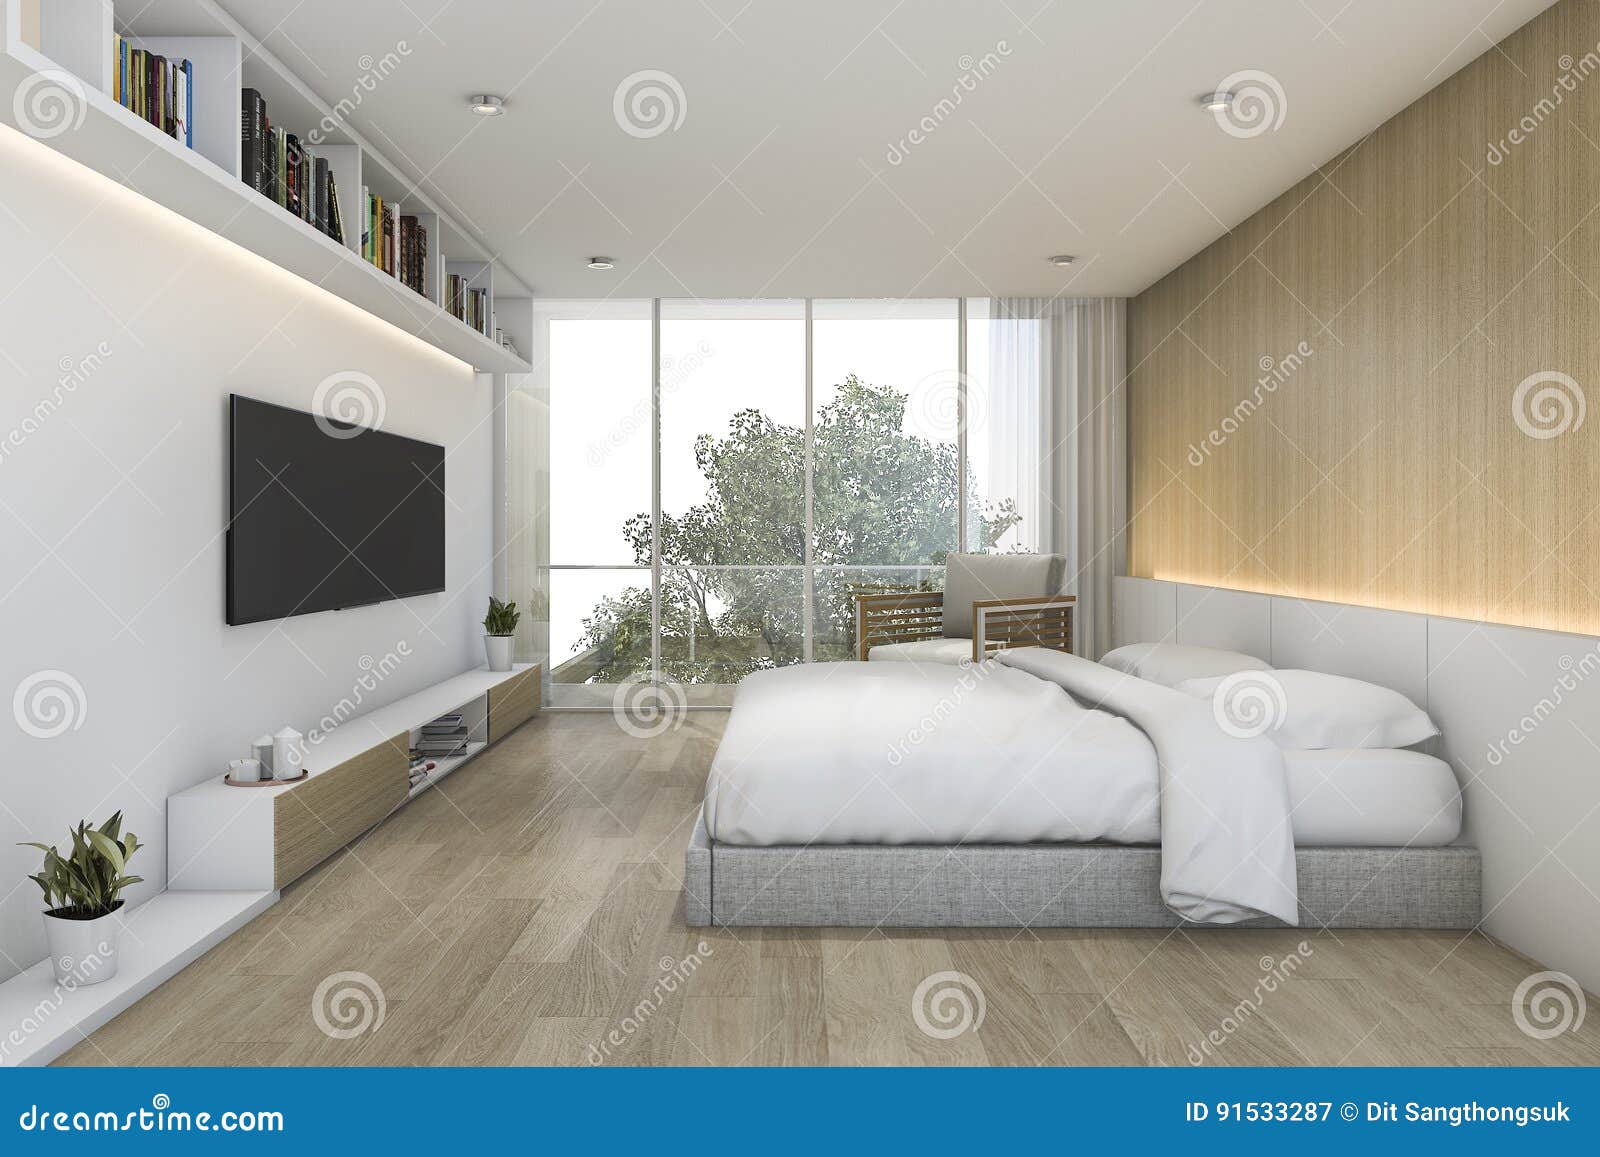 3d Rendering Minimal Wood Bedroom With Tv And Shelf Stock